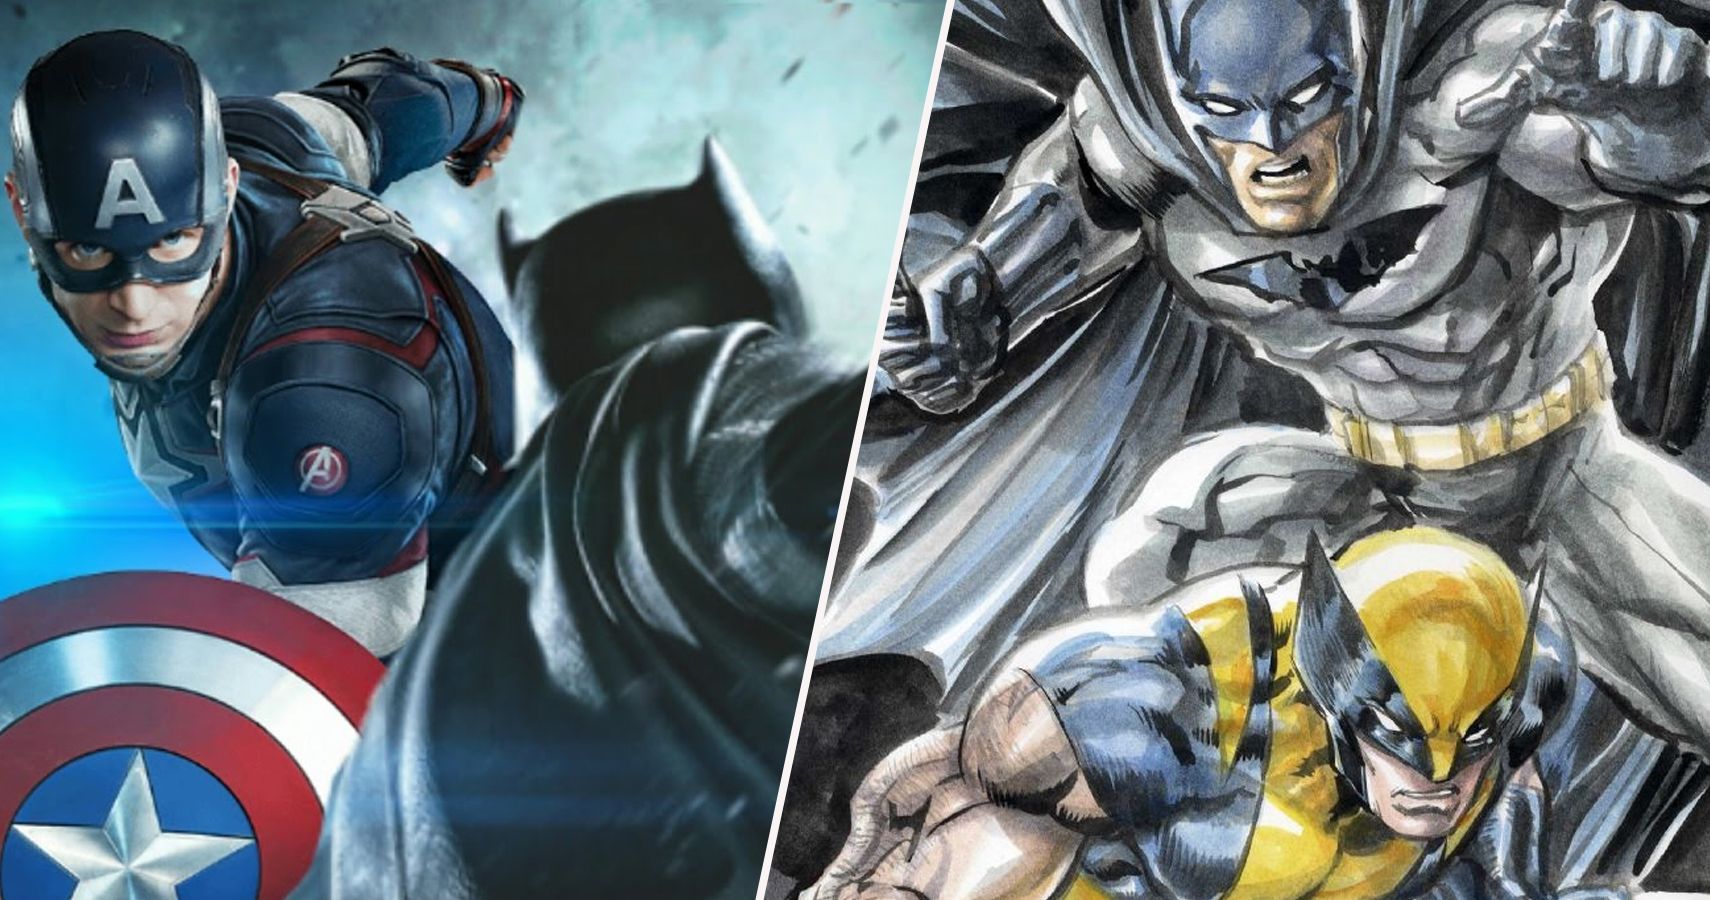 Can anyone in the DC universe defeat Batman without their powers? - Quora